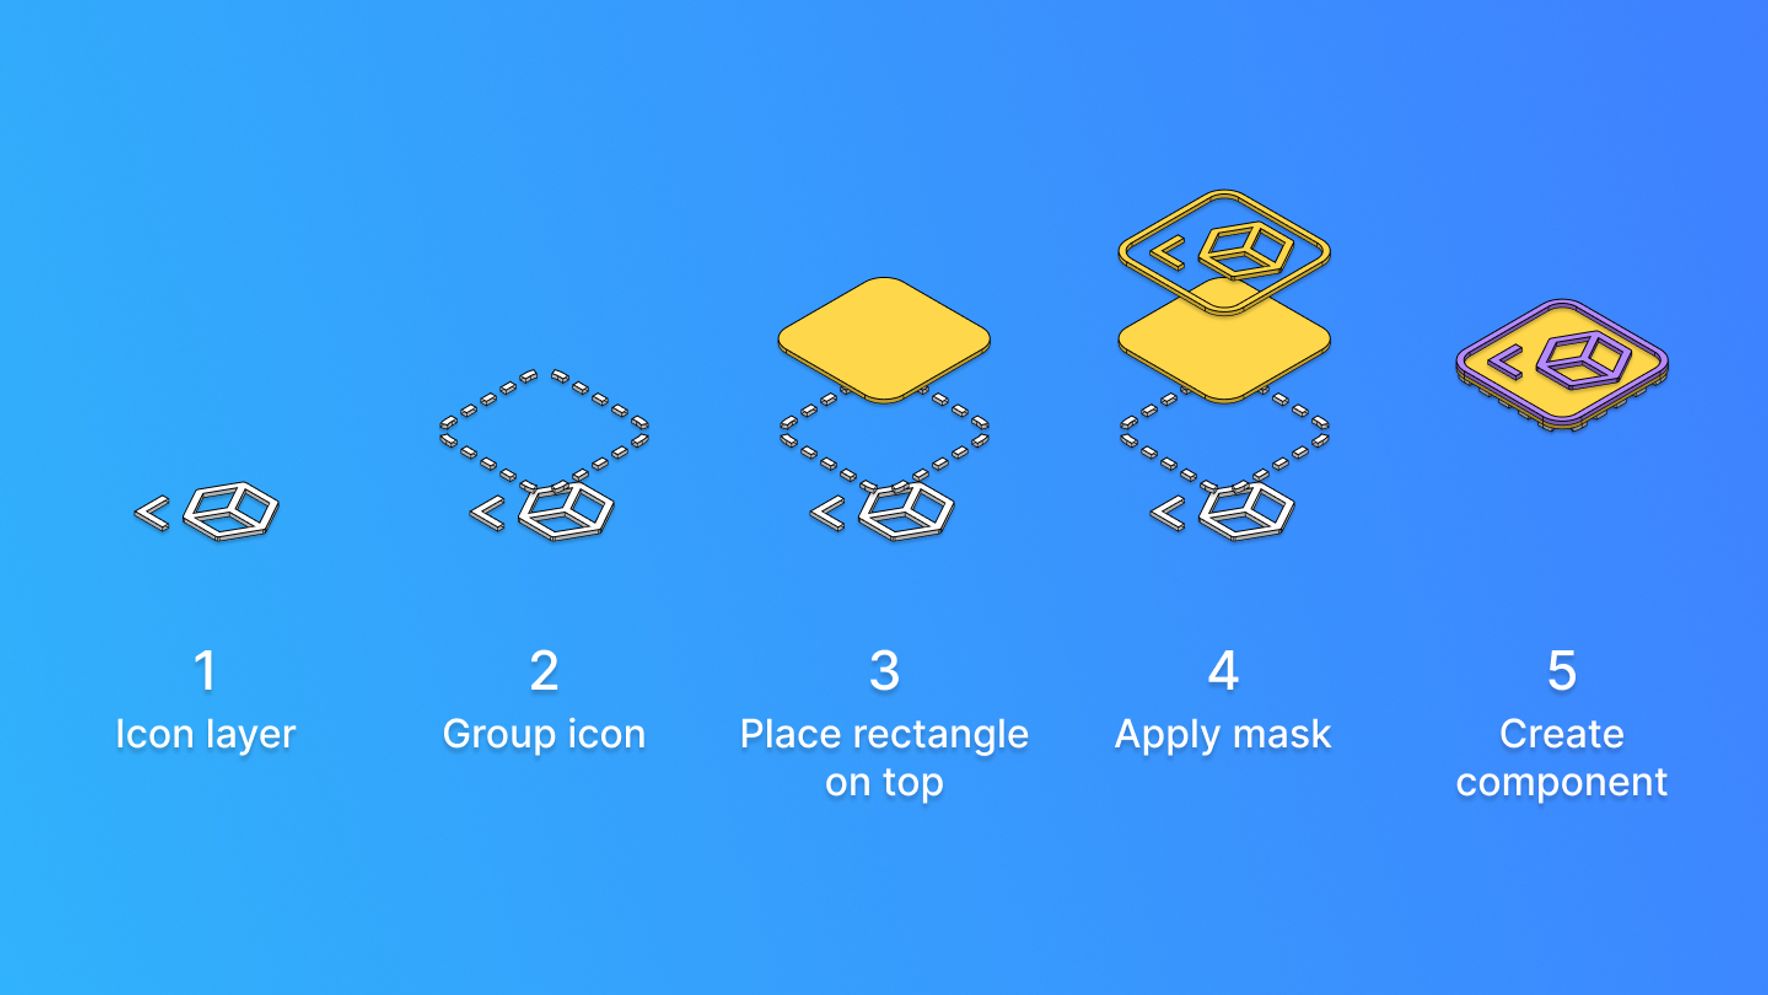 How to construct a robust icon component: Get an icon instance from your library and group it. Then place a color helper rectangle on top and mask both. Finally, create the component.